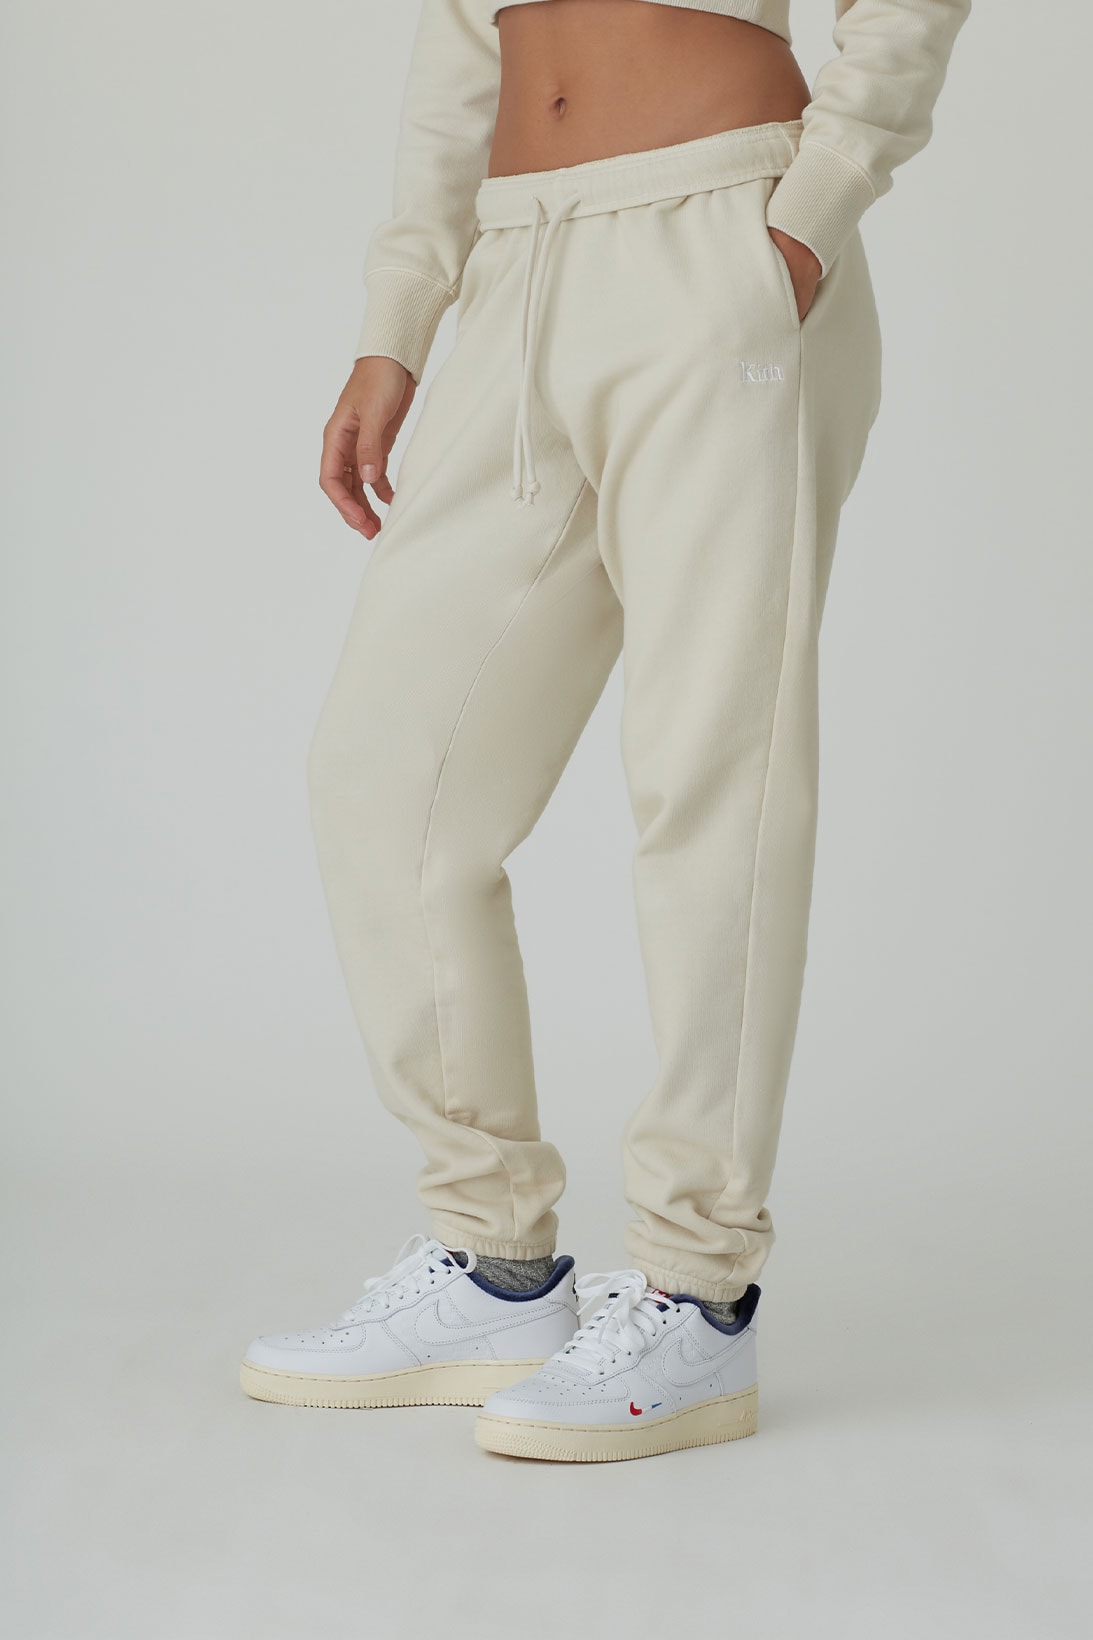 kith women spring 2021 collection jogger pants sweats sneakers